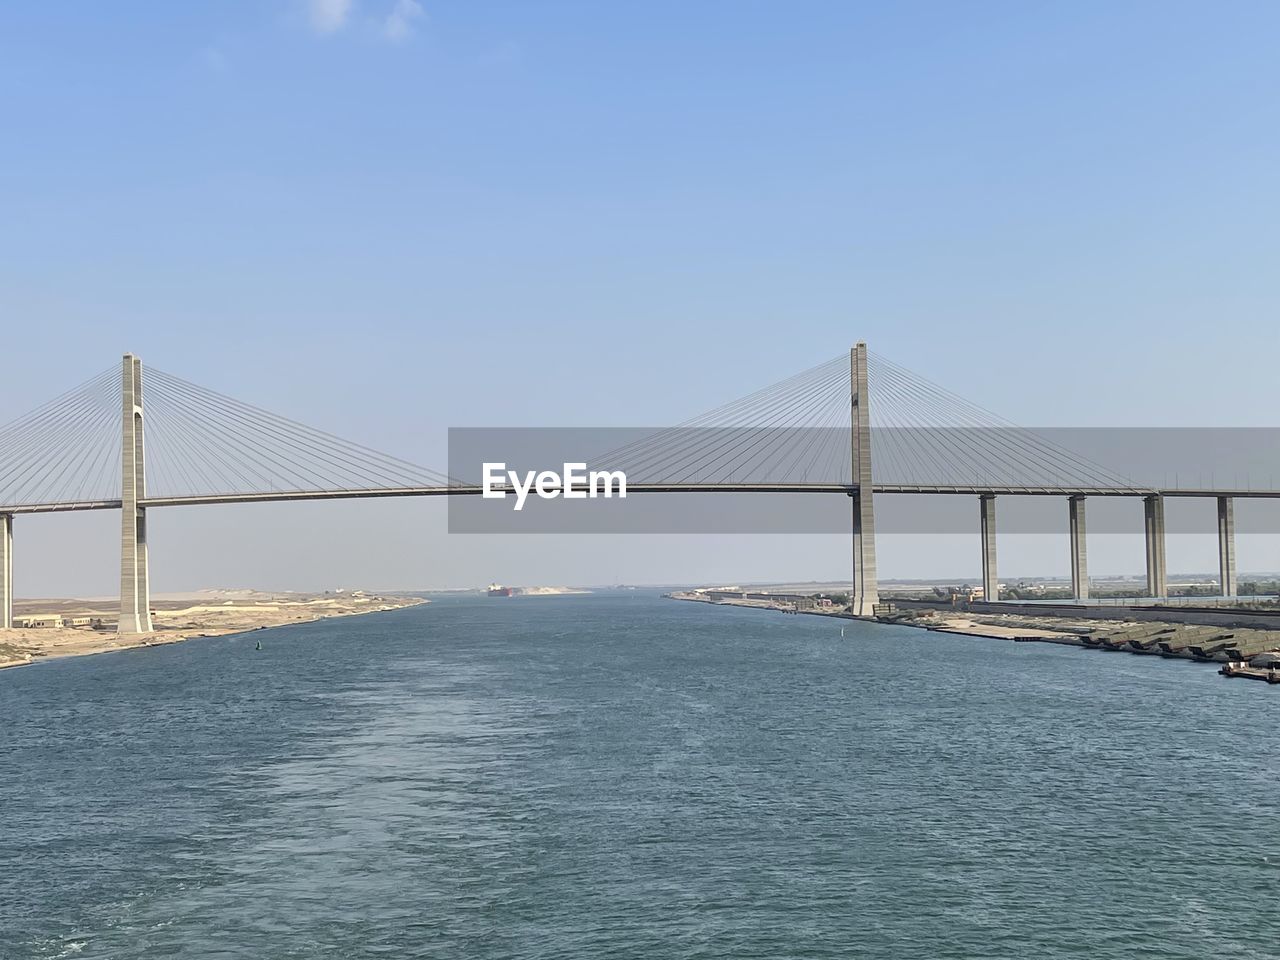 bridge, built structure, architecture, water, suspension bridge, transportation, sky, travel destinations, sea, travel, engineering, cable-stayed bridge, nature, tourism, city, copy space, bay, blue, scenics - nature, bay of water, beauty in nature, day, clear sky, outdoors, tranquility, waterfront, cityscape, building exterior, tranquil scene, sunlight, horizon, sunny, urban skyline, landscape, environment, long, road, beach, land, cloud, crossing, coastline, idyllic